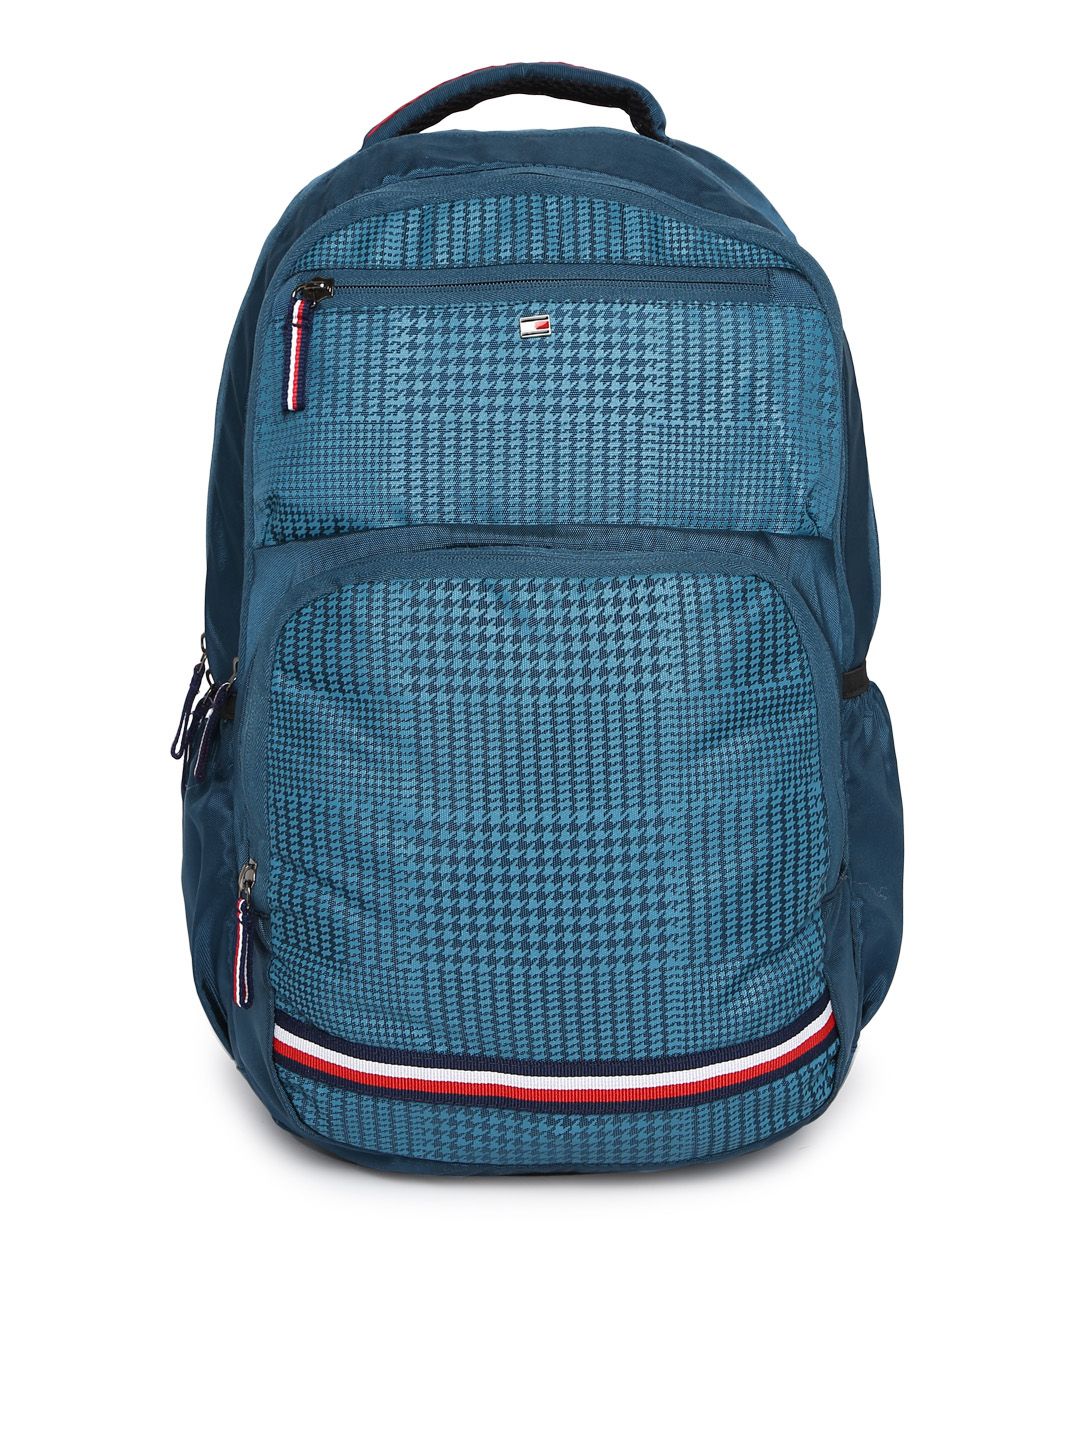 Tommy Hilfiger Unisex Blue Backpack Price in India